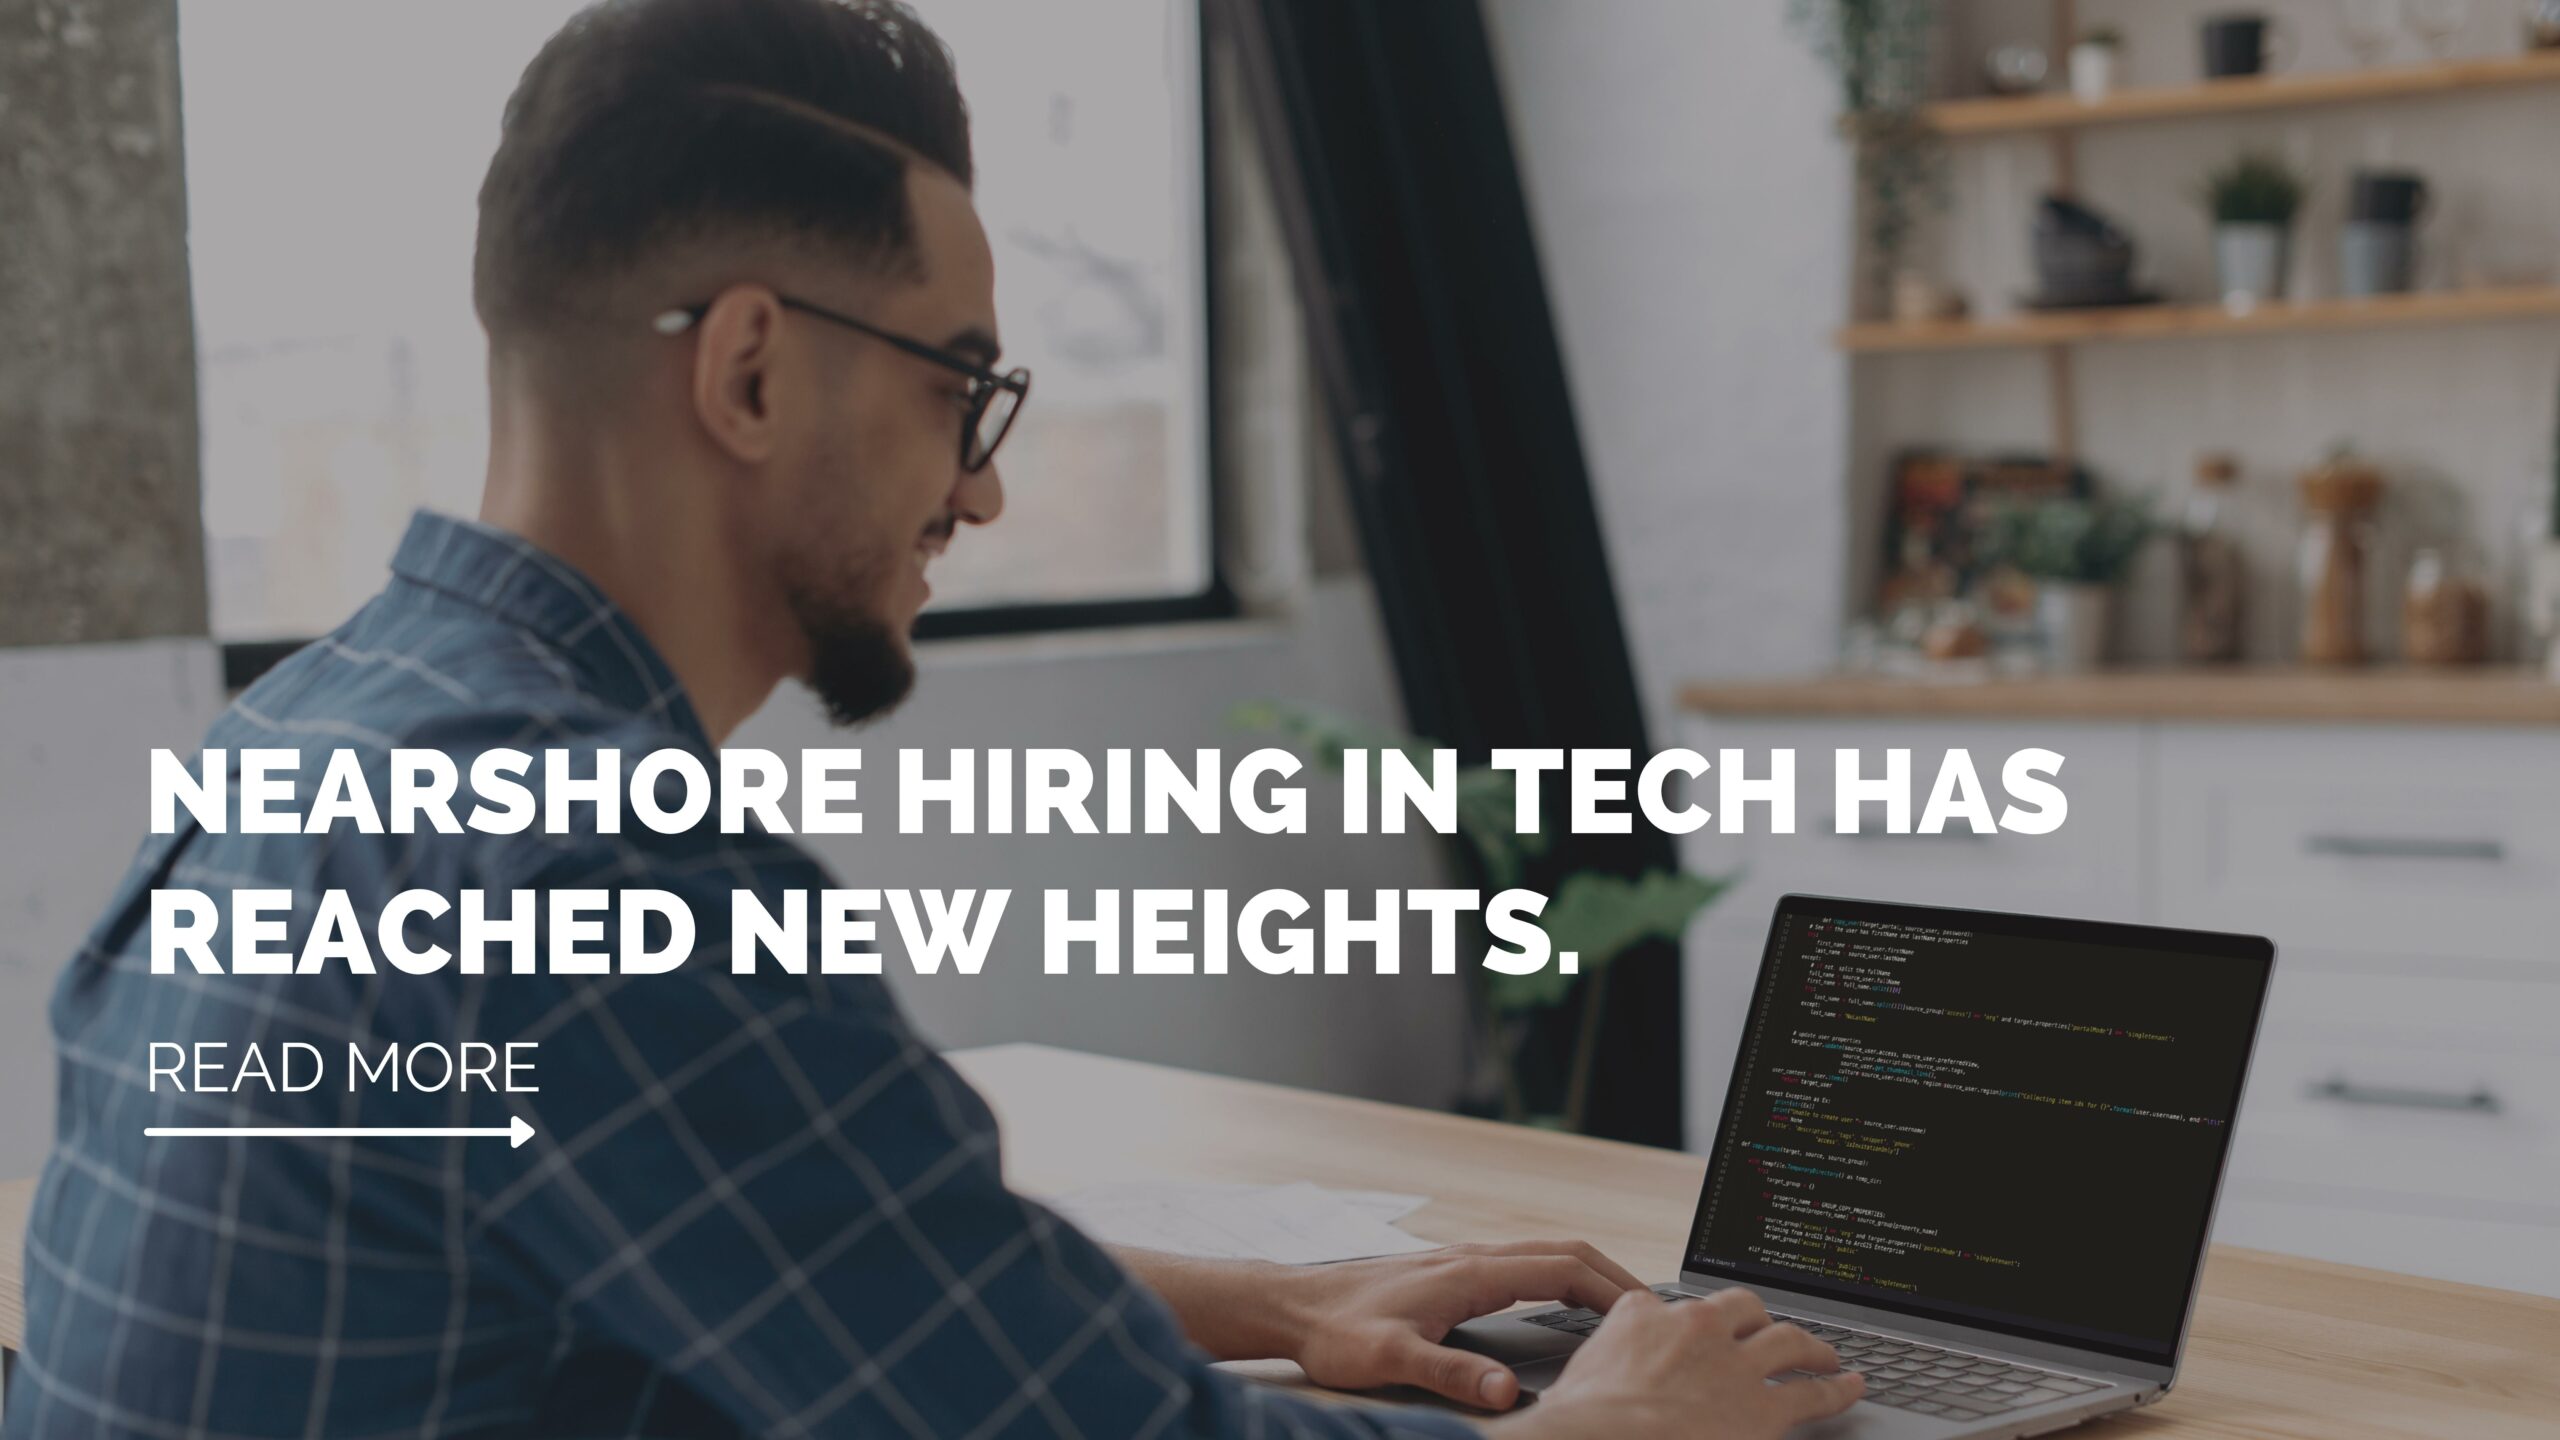 Nearshore hiring in tech has reached new heights ITJ